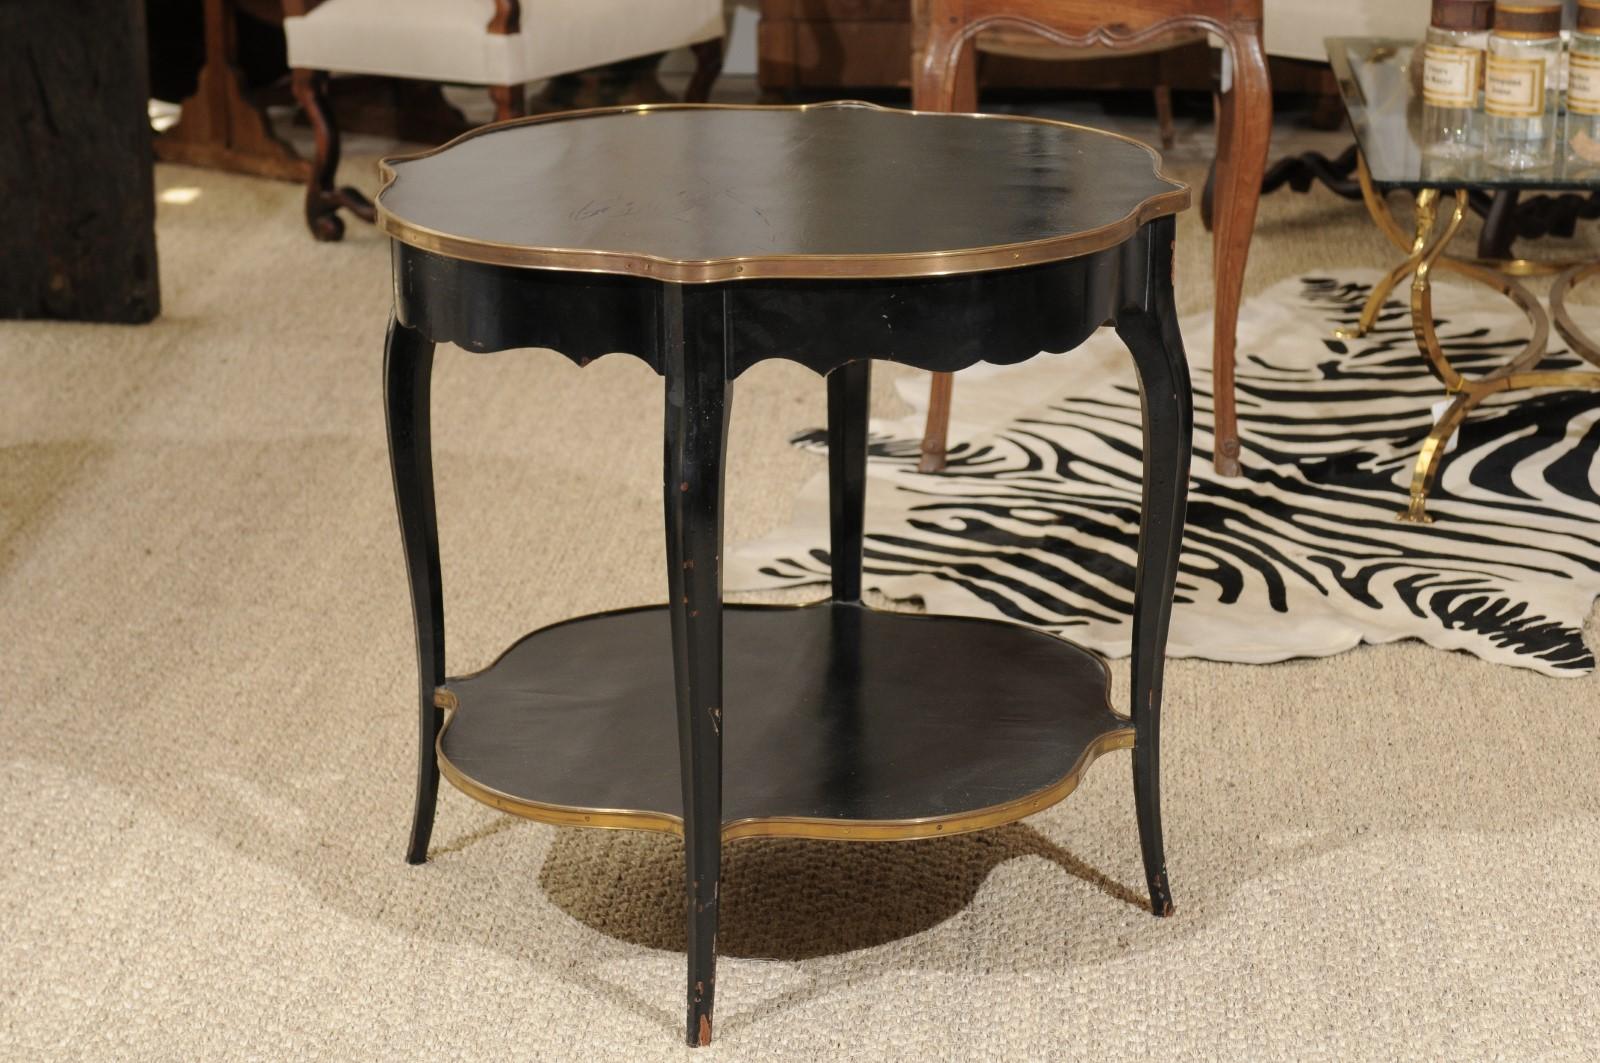 A French Napoleon III style black-painted quatrefoil side table from the early 20th century, with gold accents, scalloped apron and lower shelf. A very unusual, quatrefoil-shaped French table with black paint and gold detailing. Its elegant lines